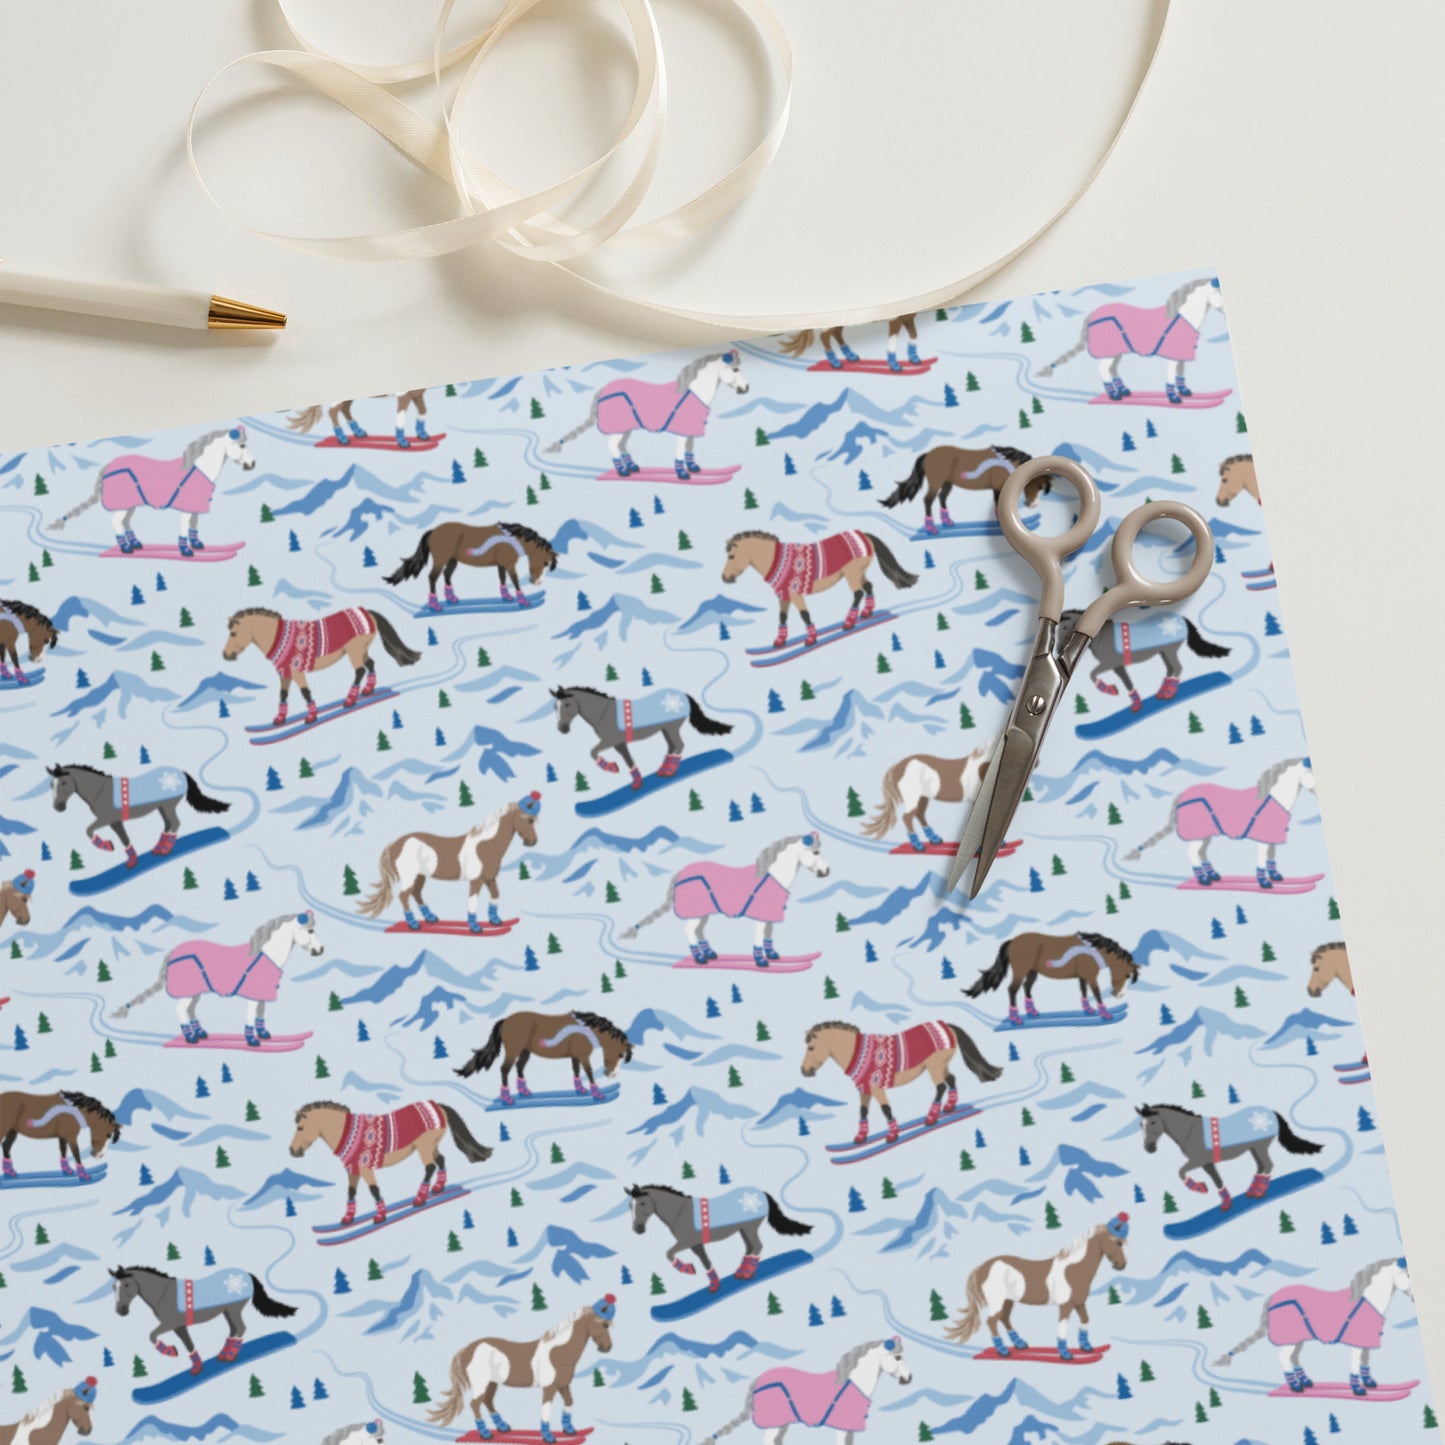 Snow Ski Ponies Wrapping Paper Sheets